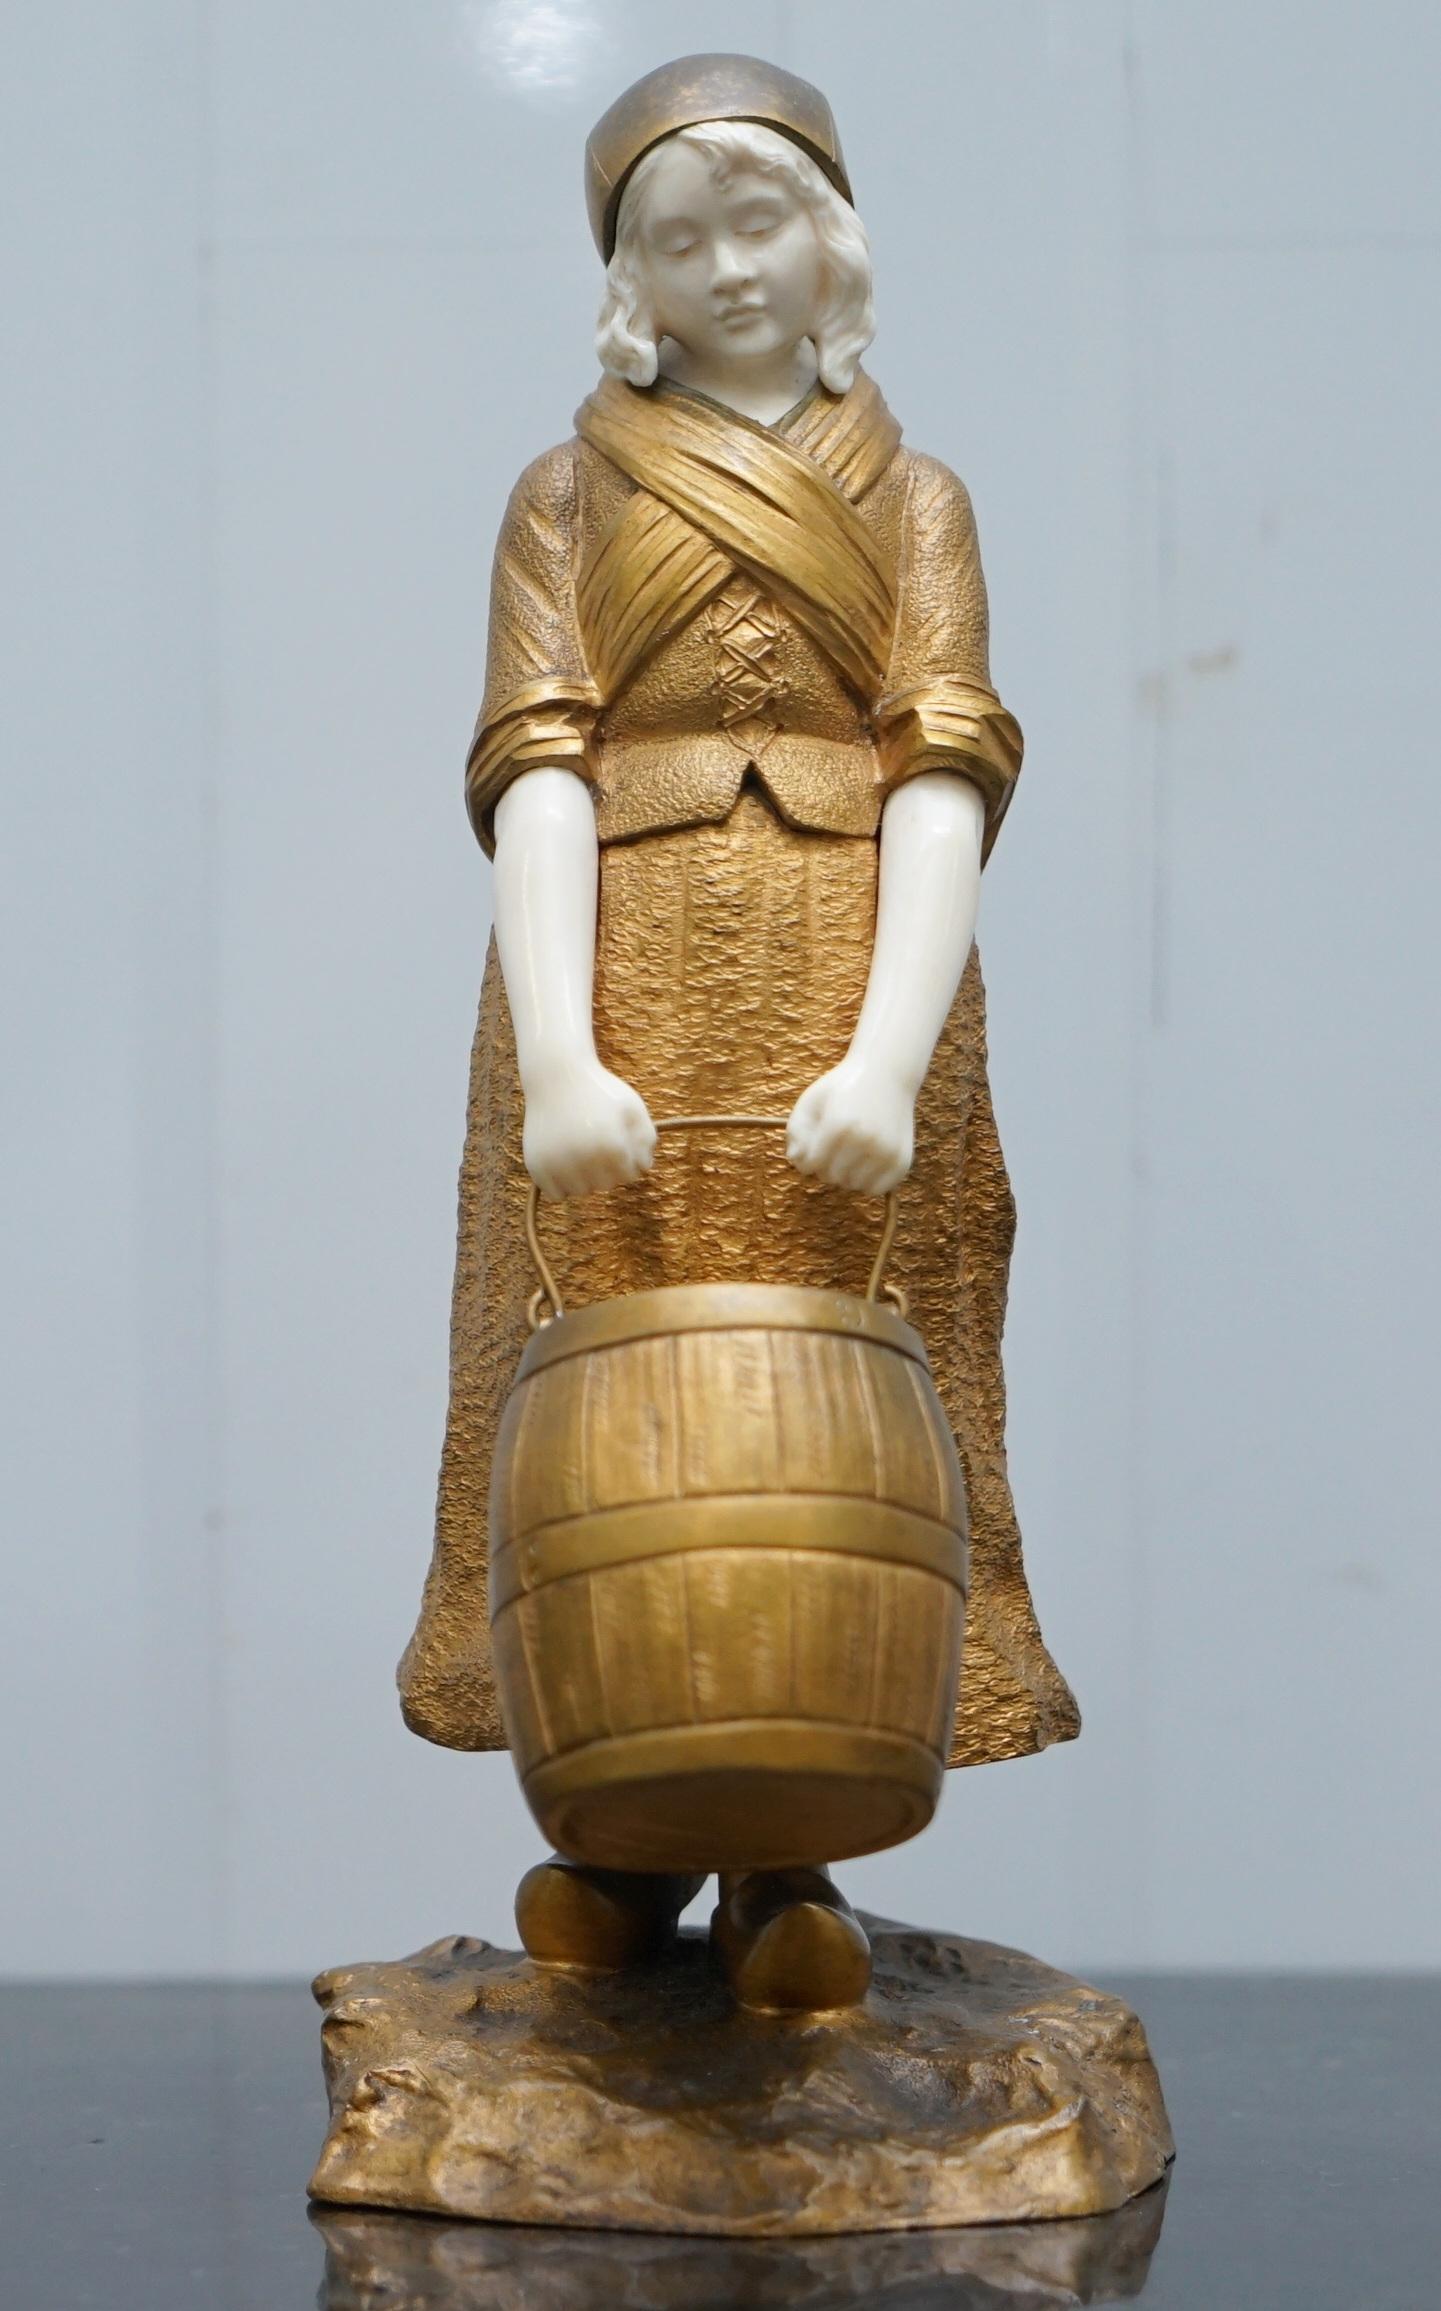 We are delighted to offer for sale this stunning very rare and highly collectable Dominique Alonzo gilt bronze statue of a young carrying a barrel 

I have two of these statues, the second young lady is listed under my others for sale and not